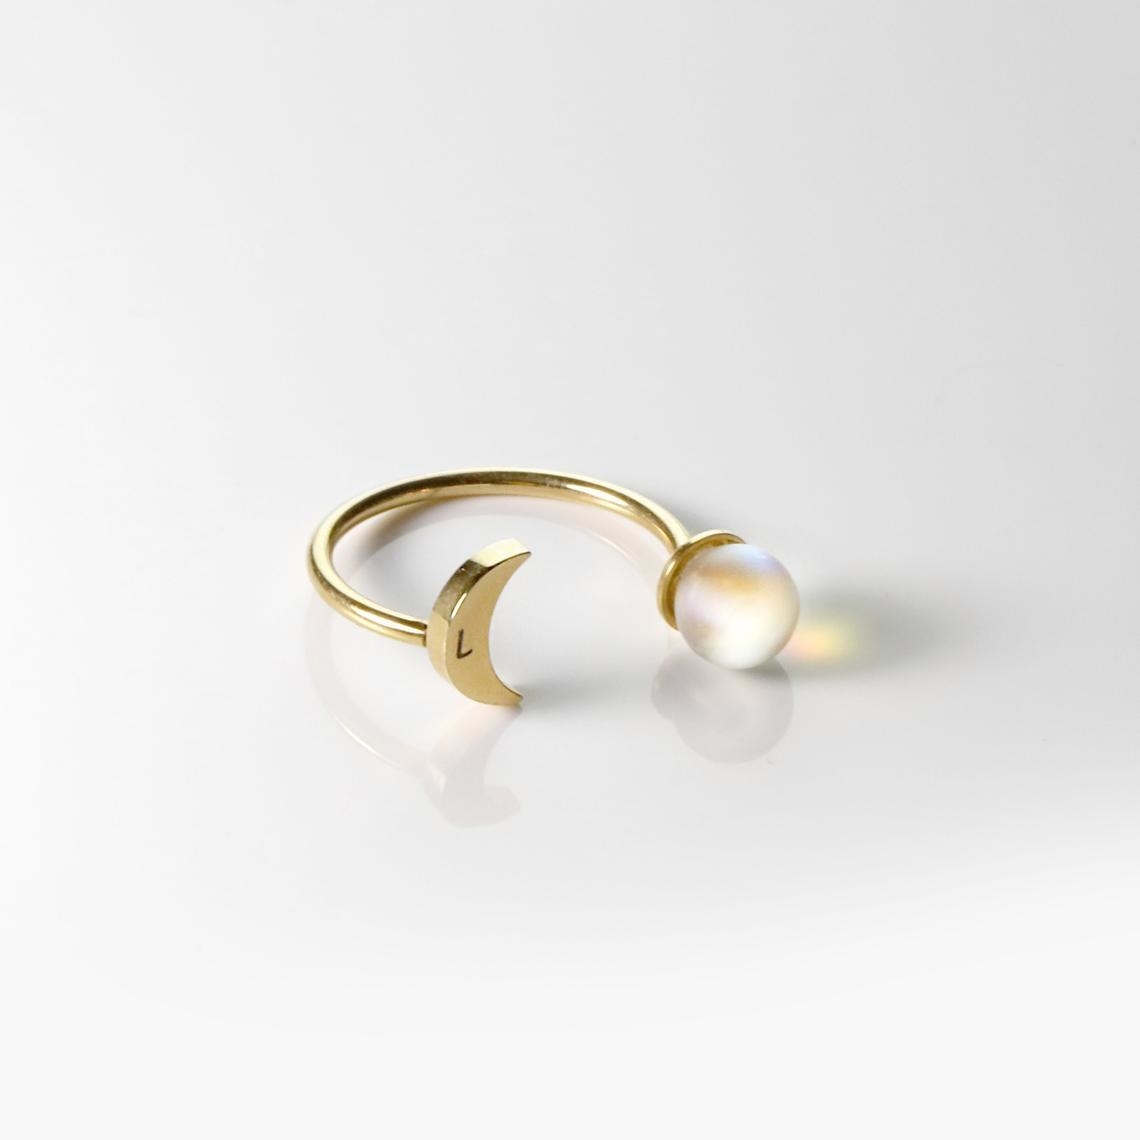 adjustable ring with gold colored crescent moon with single initial on one side and moonstone on the other